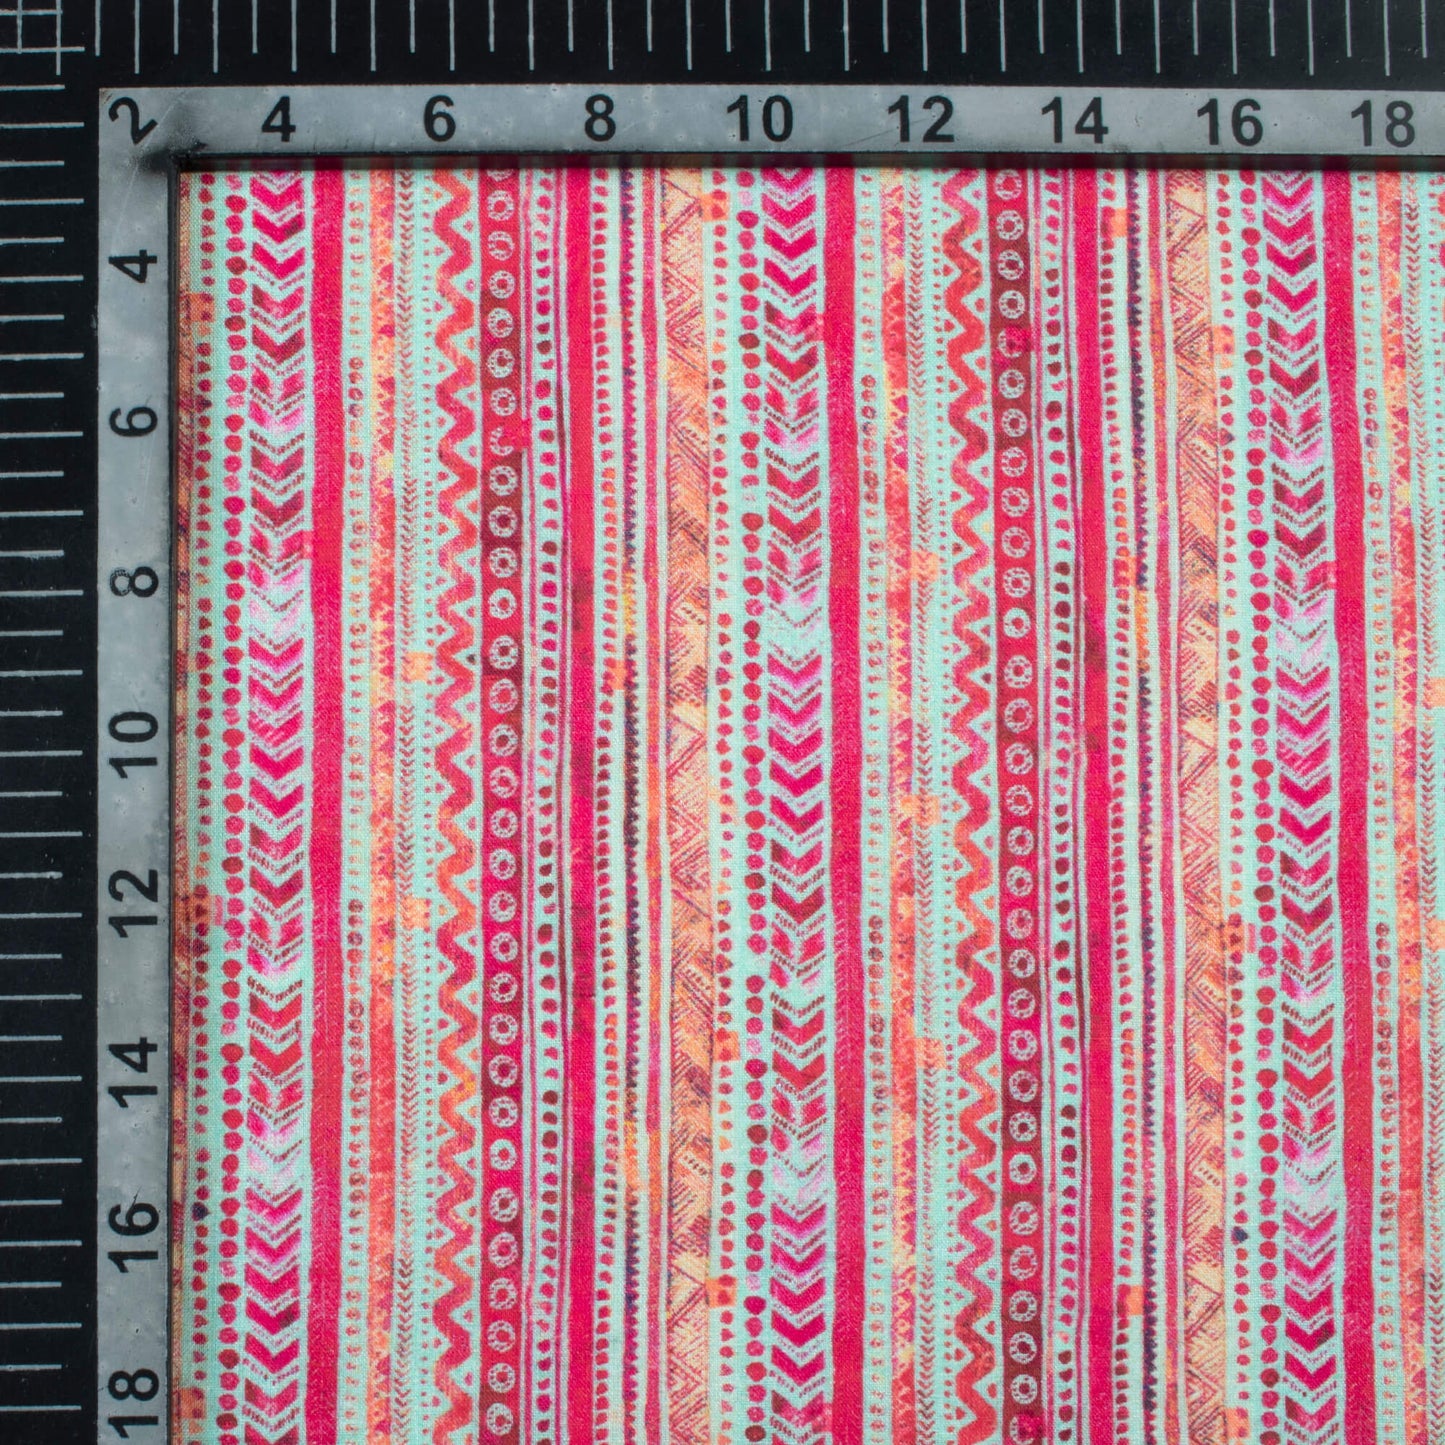 Hot Pink And Powder Blue Stripes Pattern Digital Print Cotton Cambric Fabric